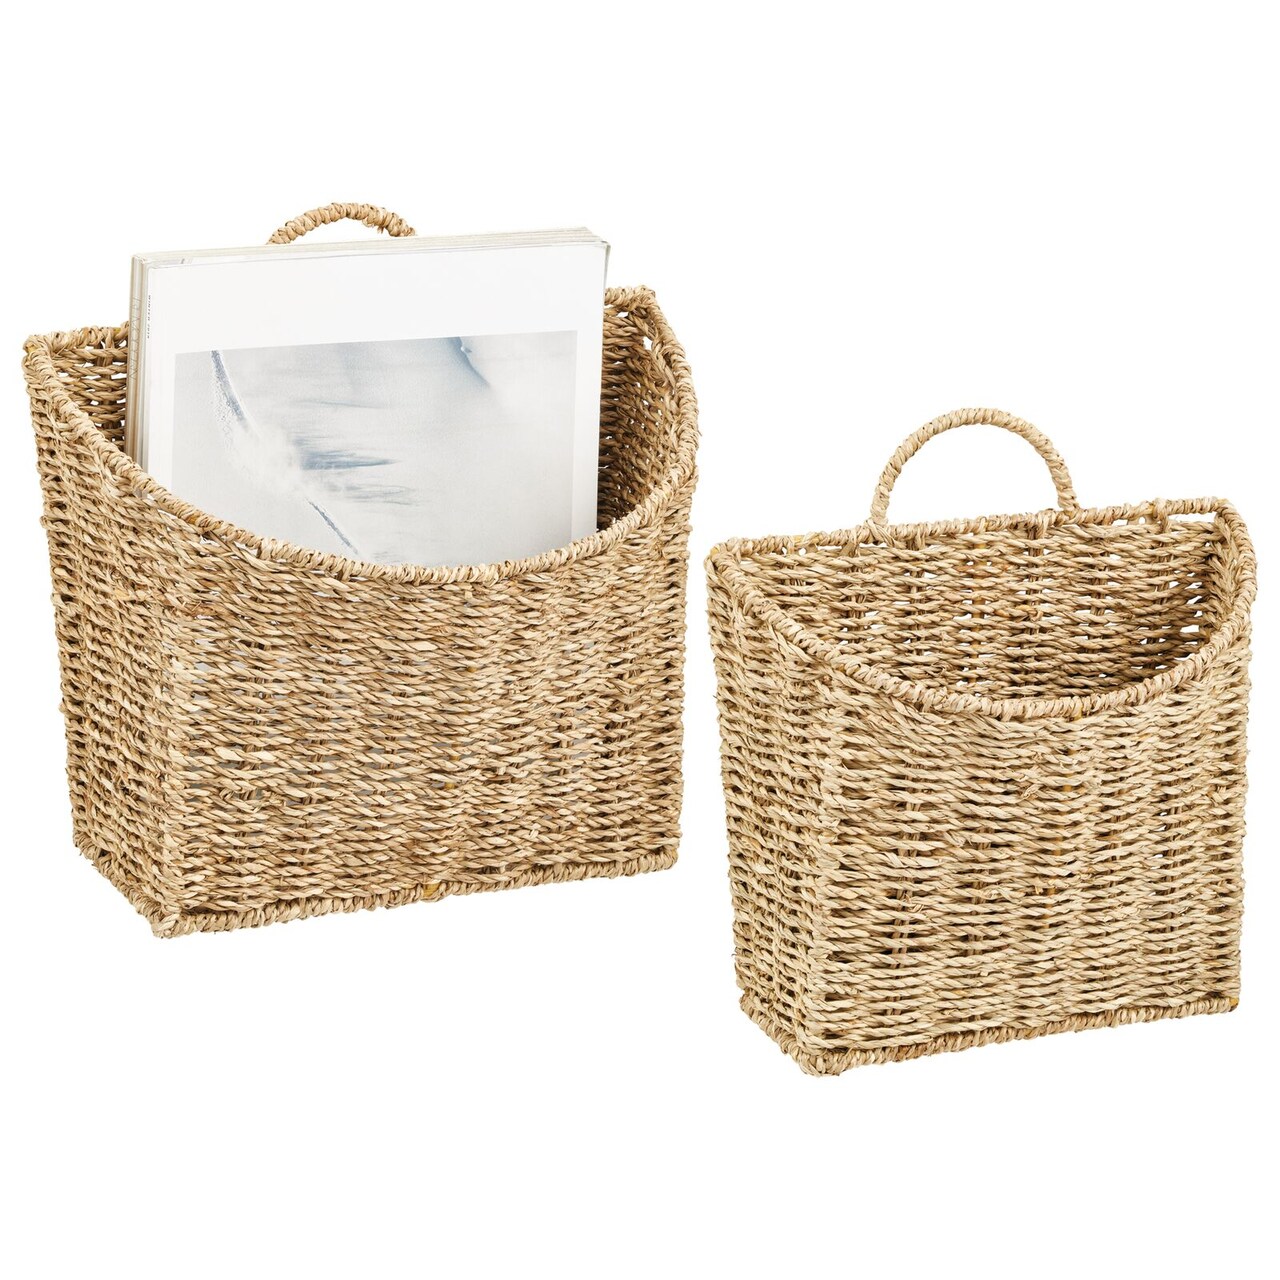 mDesign Woven Seagrass Hanging Wall Storage Basket - Set of 2